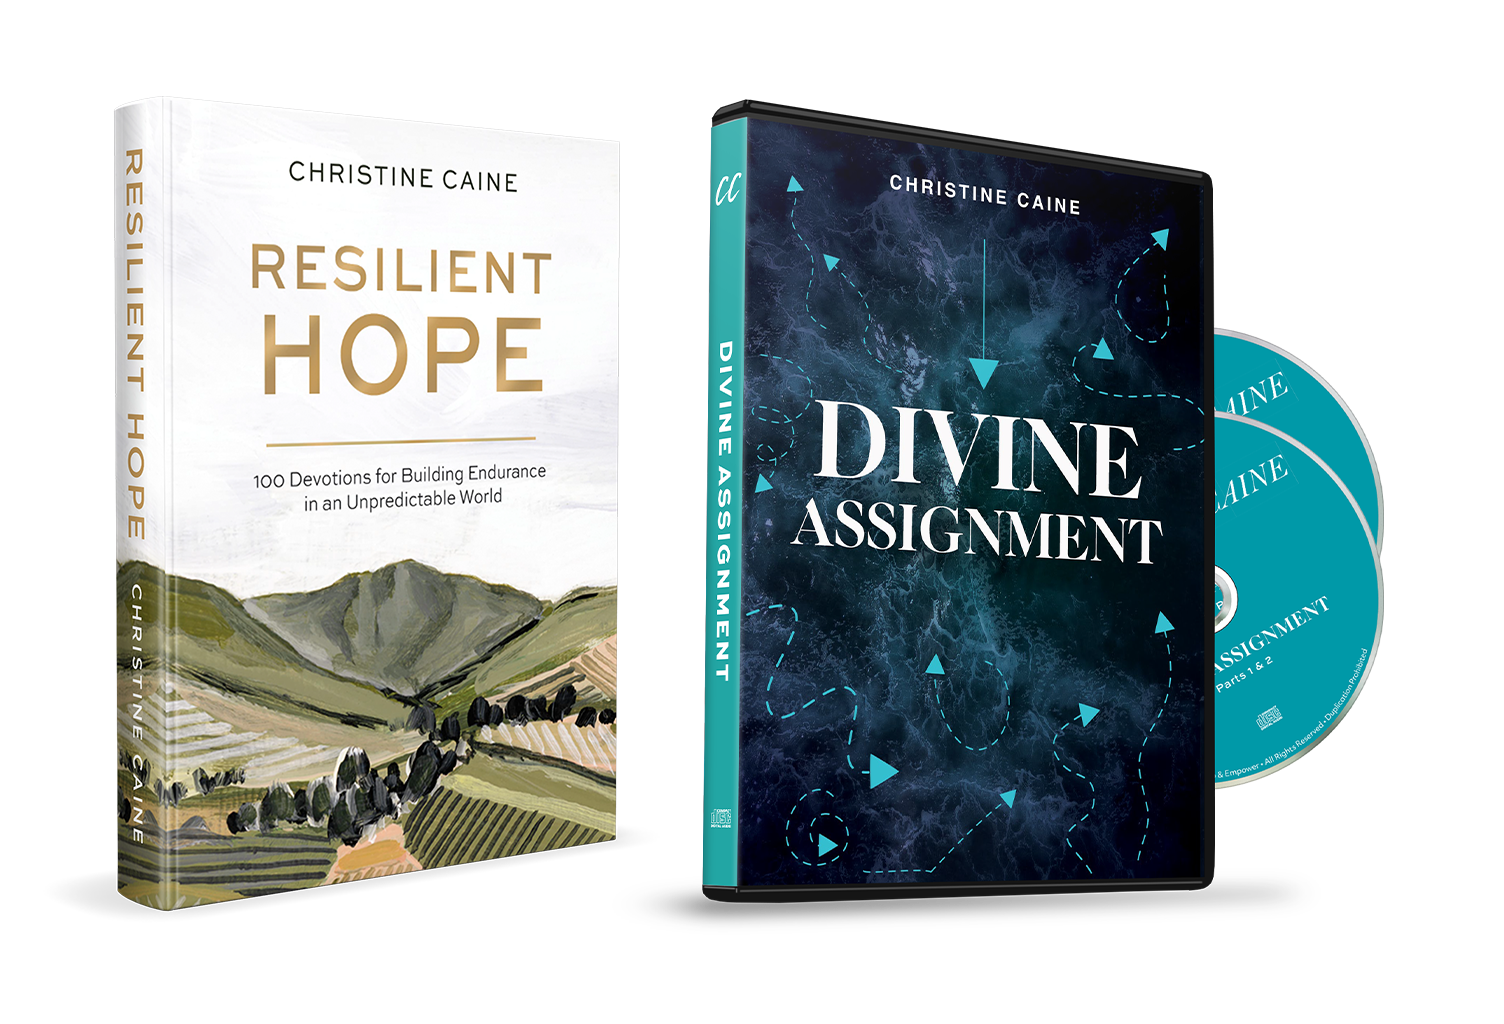 Christine Caine's Divine Assignment and her daily devotional Resilient Hope on TBN